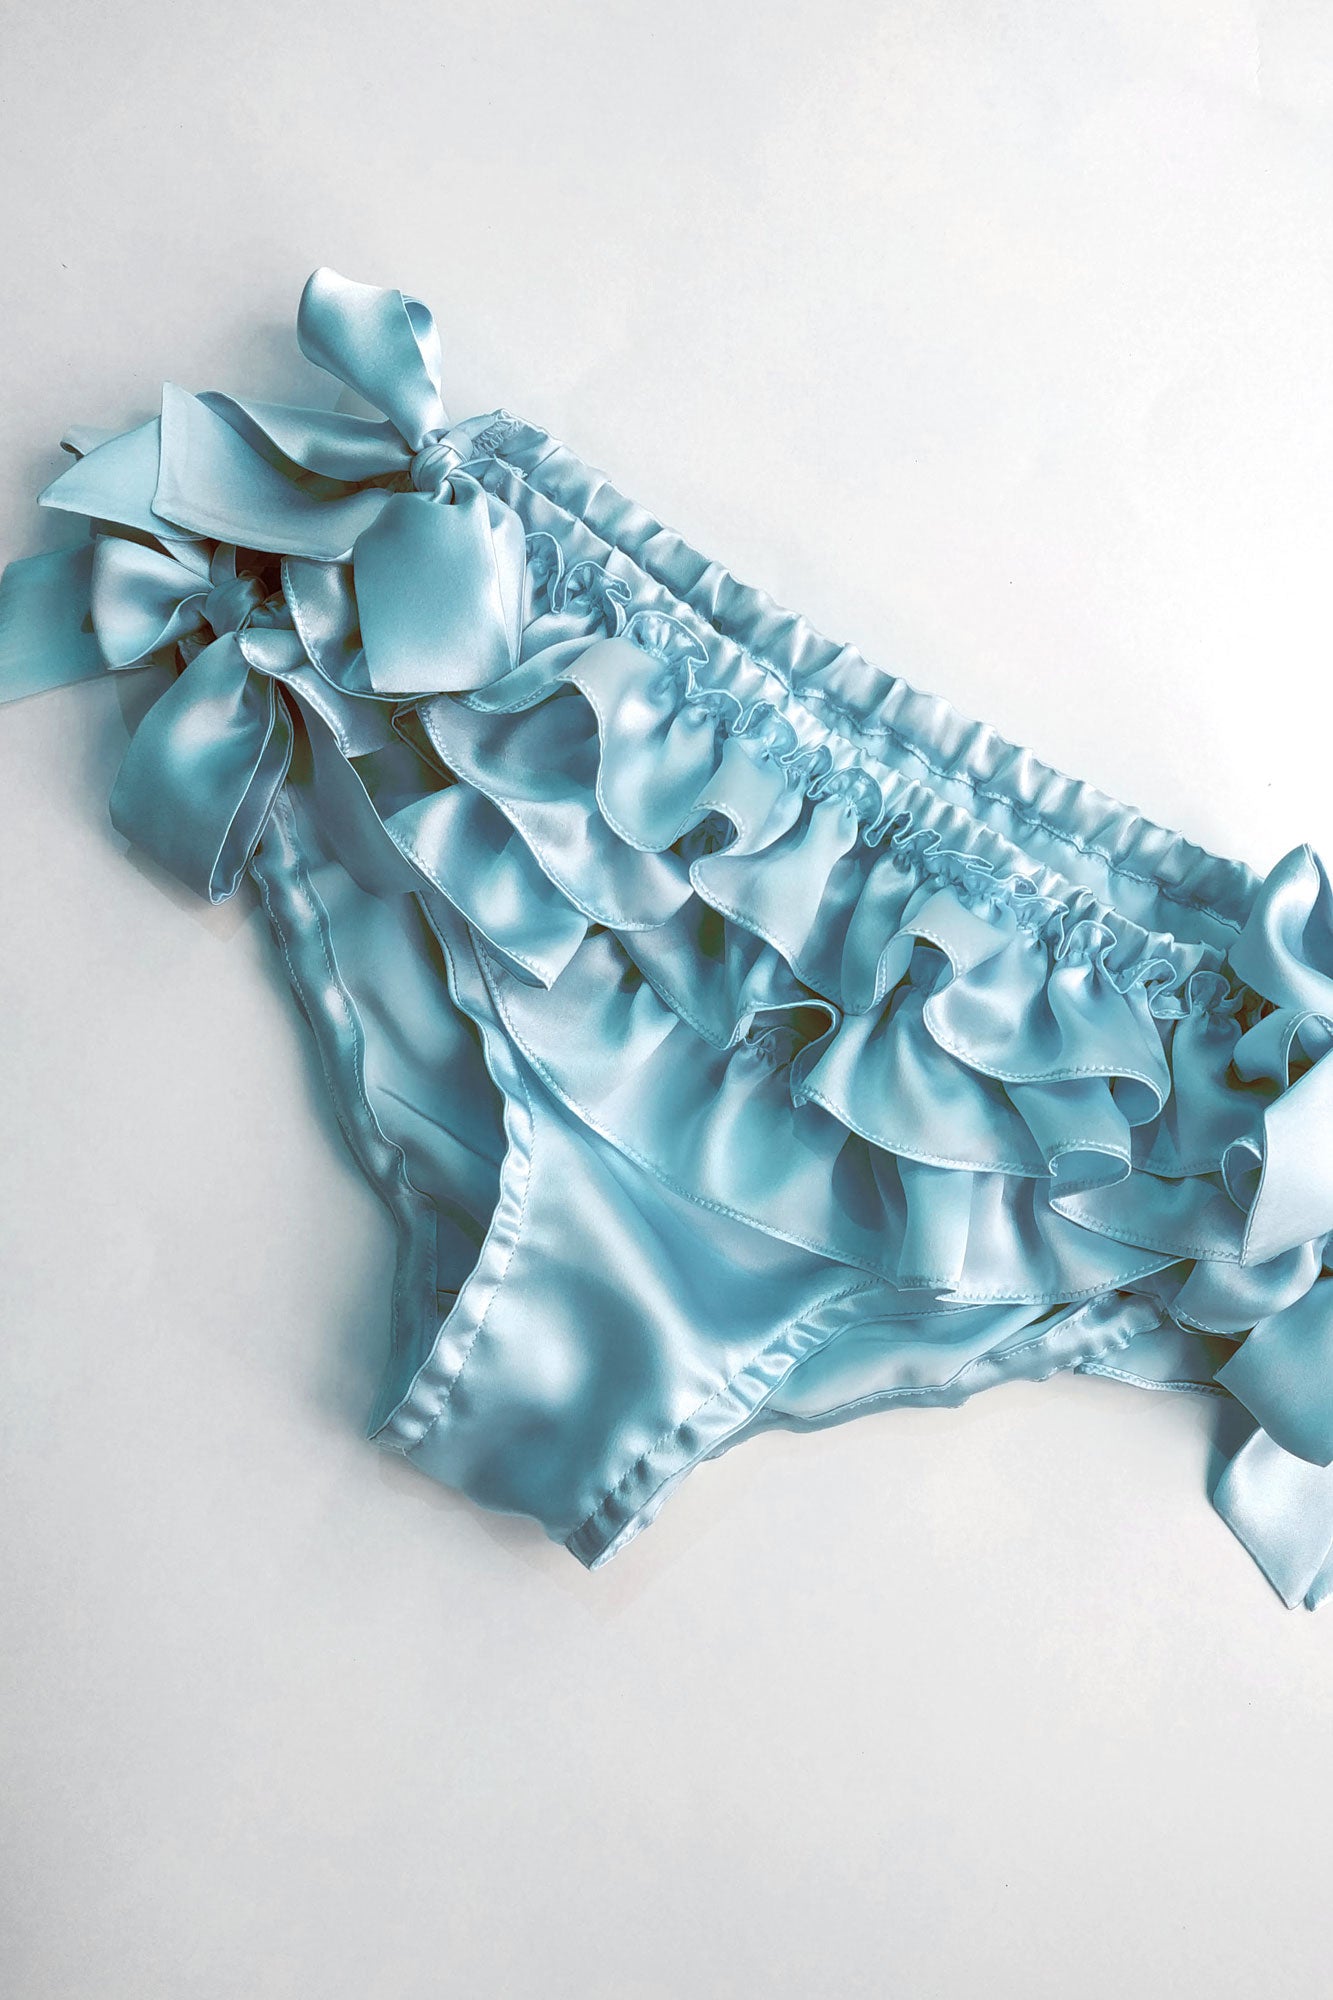 Silk ruffle panty with blue side tie bows and 3 ruffles